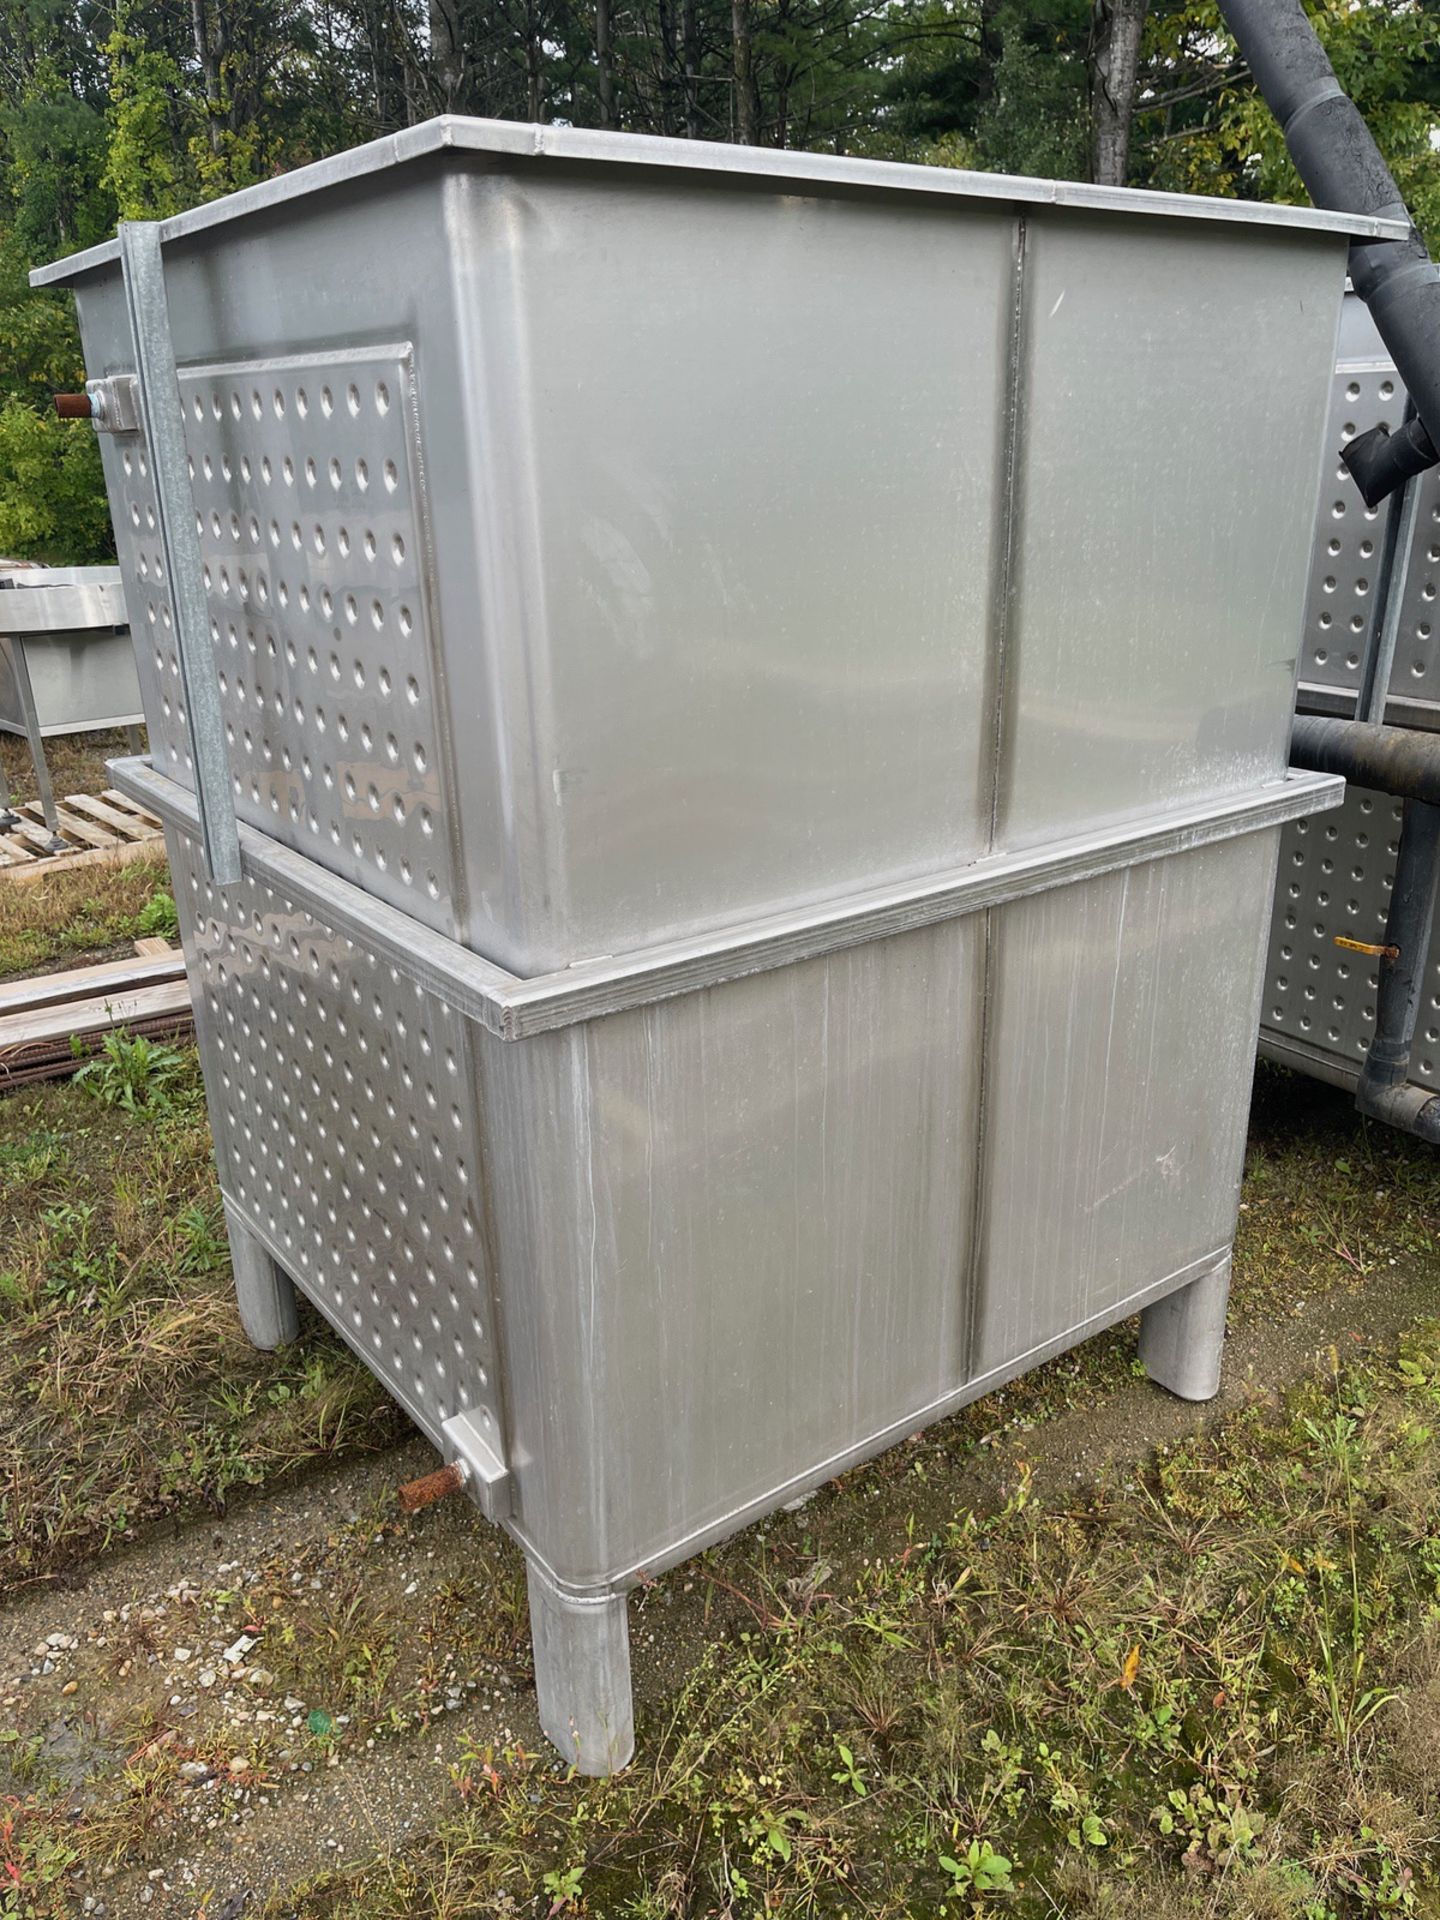 Metalcraft 900 Gallon Stainless Steel Tote, Model 518321, S/N 71619-4 (Located in | Rig Fee $100 - Image 3 of 3